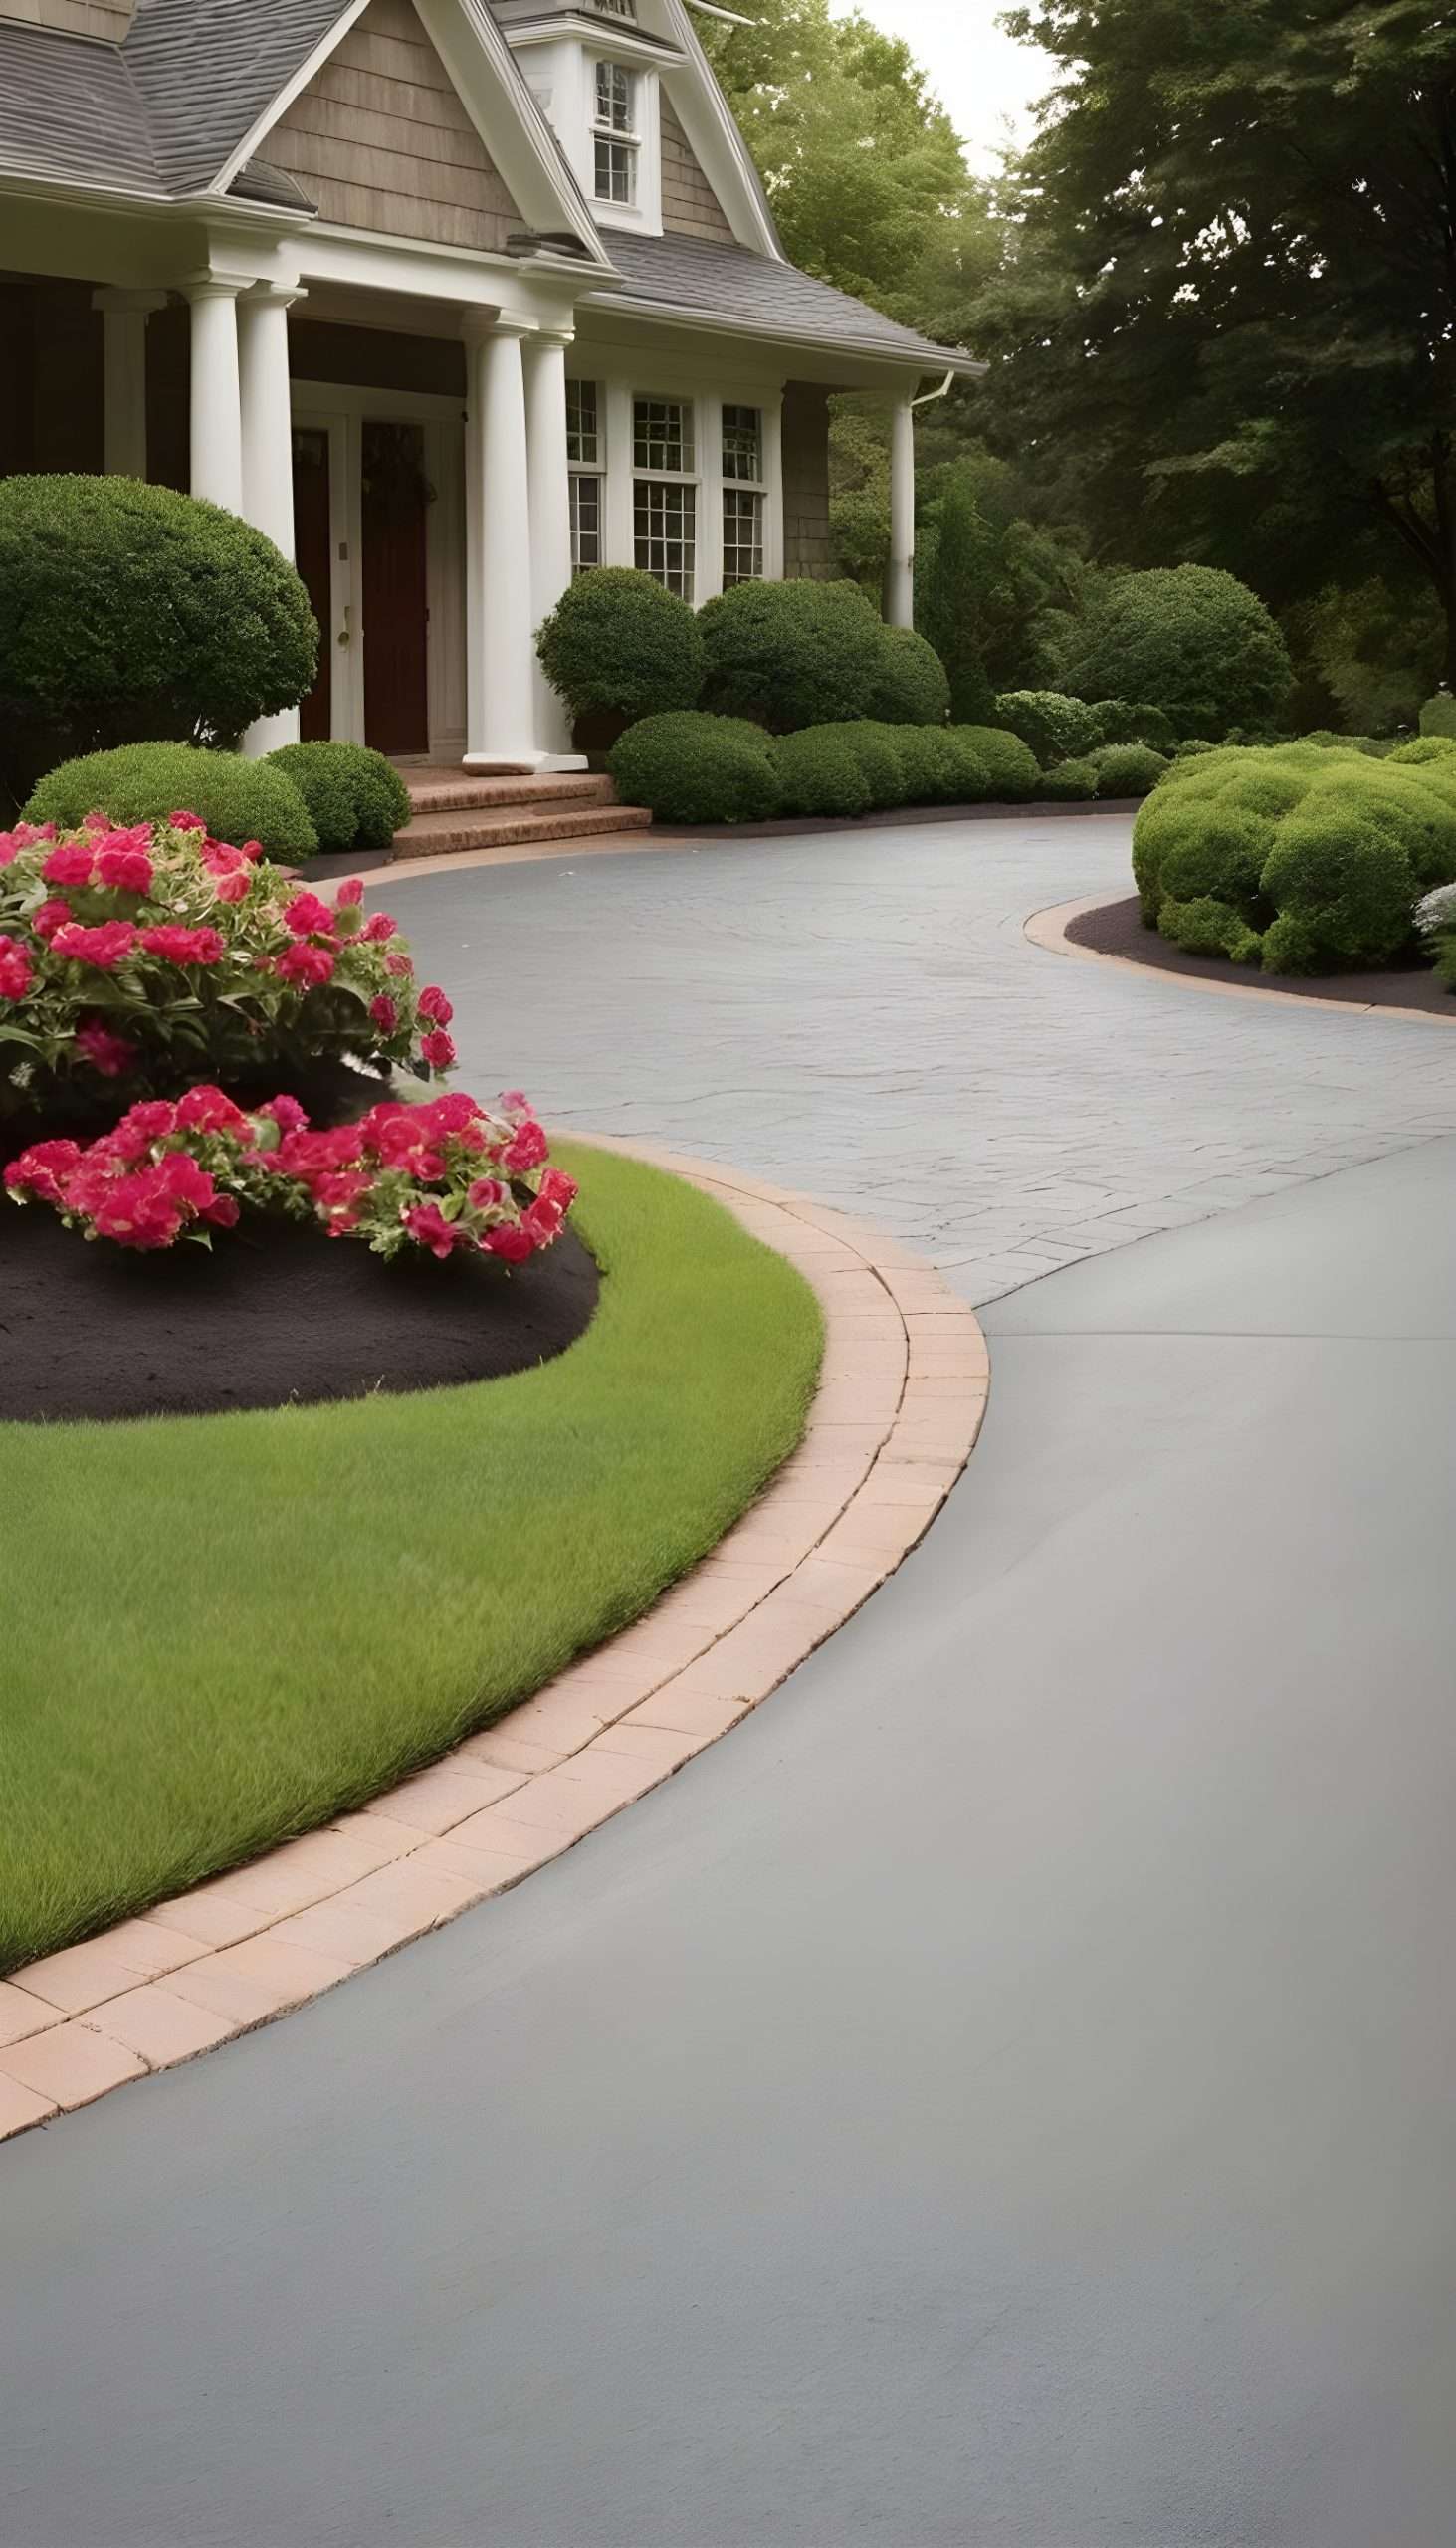 Perfectly Paved Perfection driveway entrance